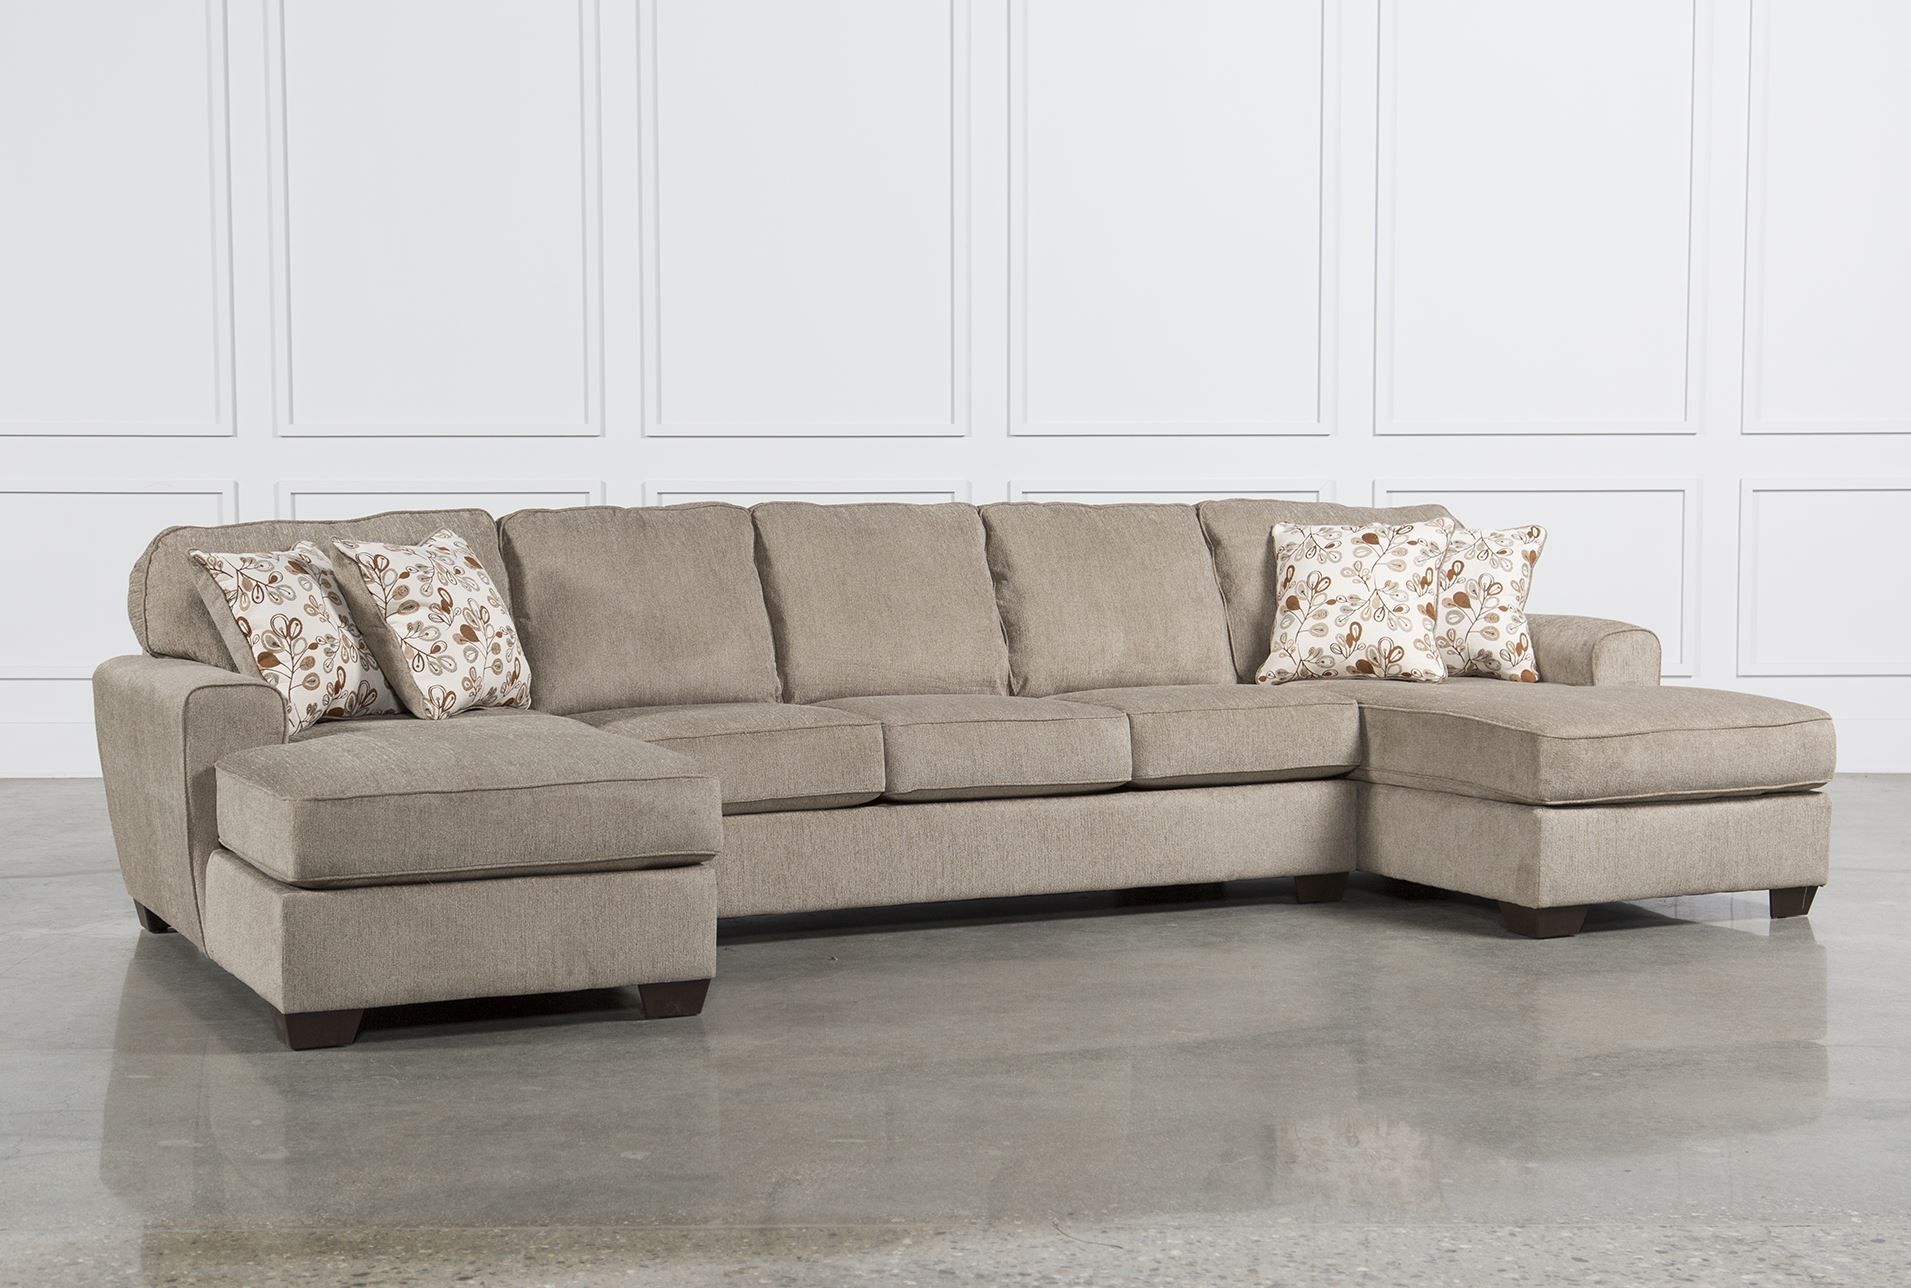 Sectional Sofas Tucson 26 With Sectional Sofas Tucson – Fjellkjeden With Tucson Sectional Sofas (View 9 of 10)